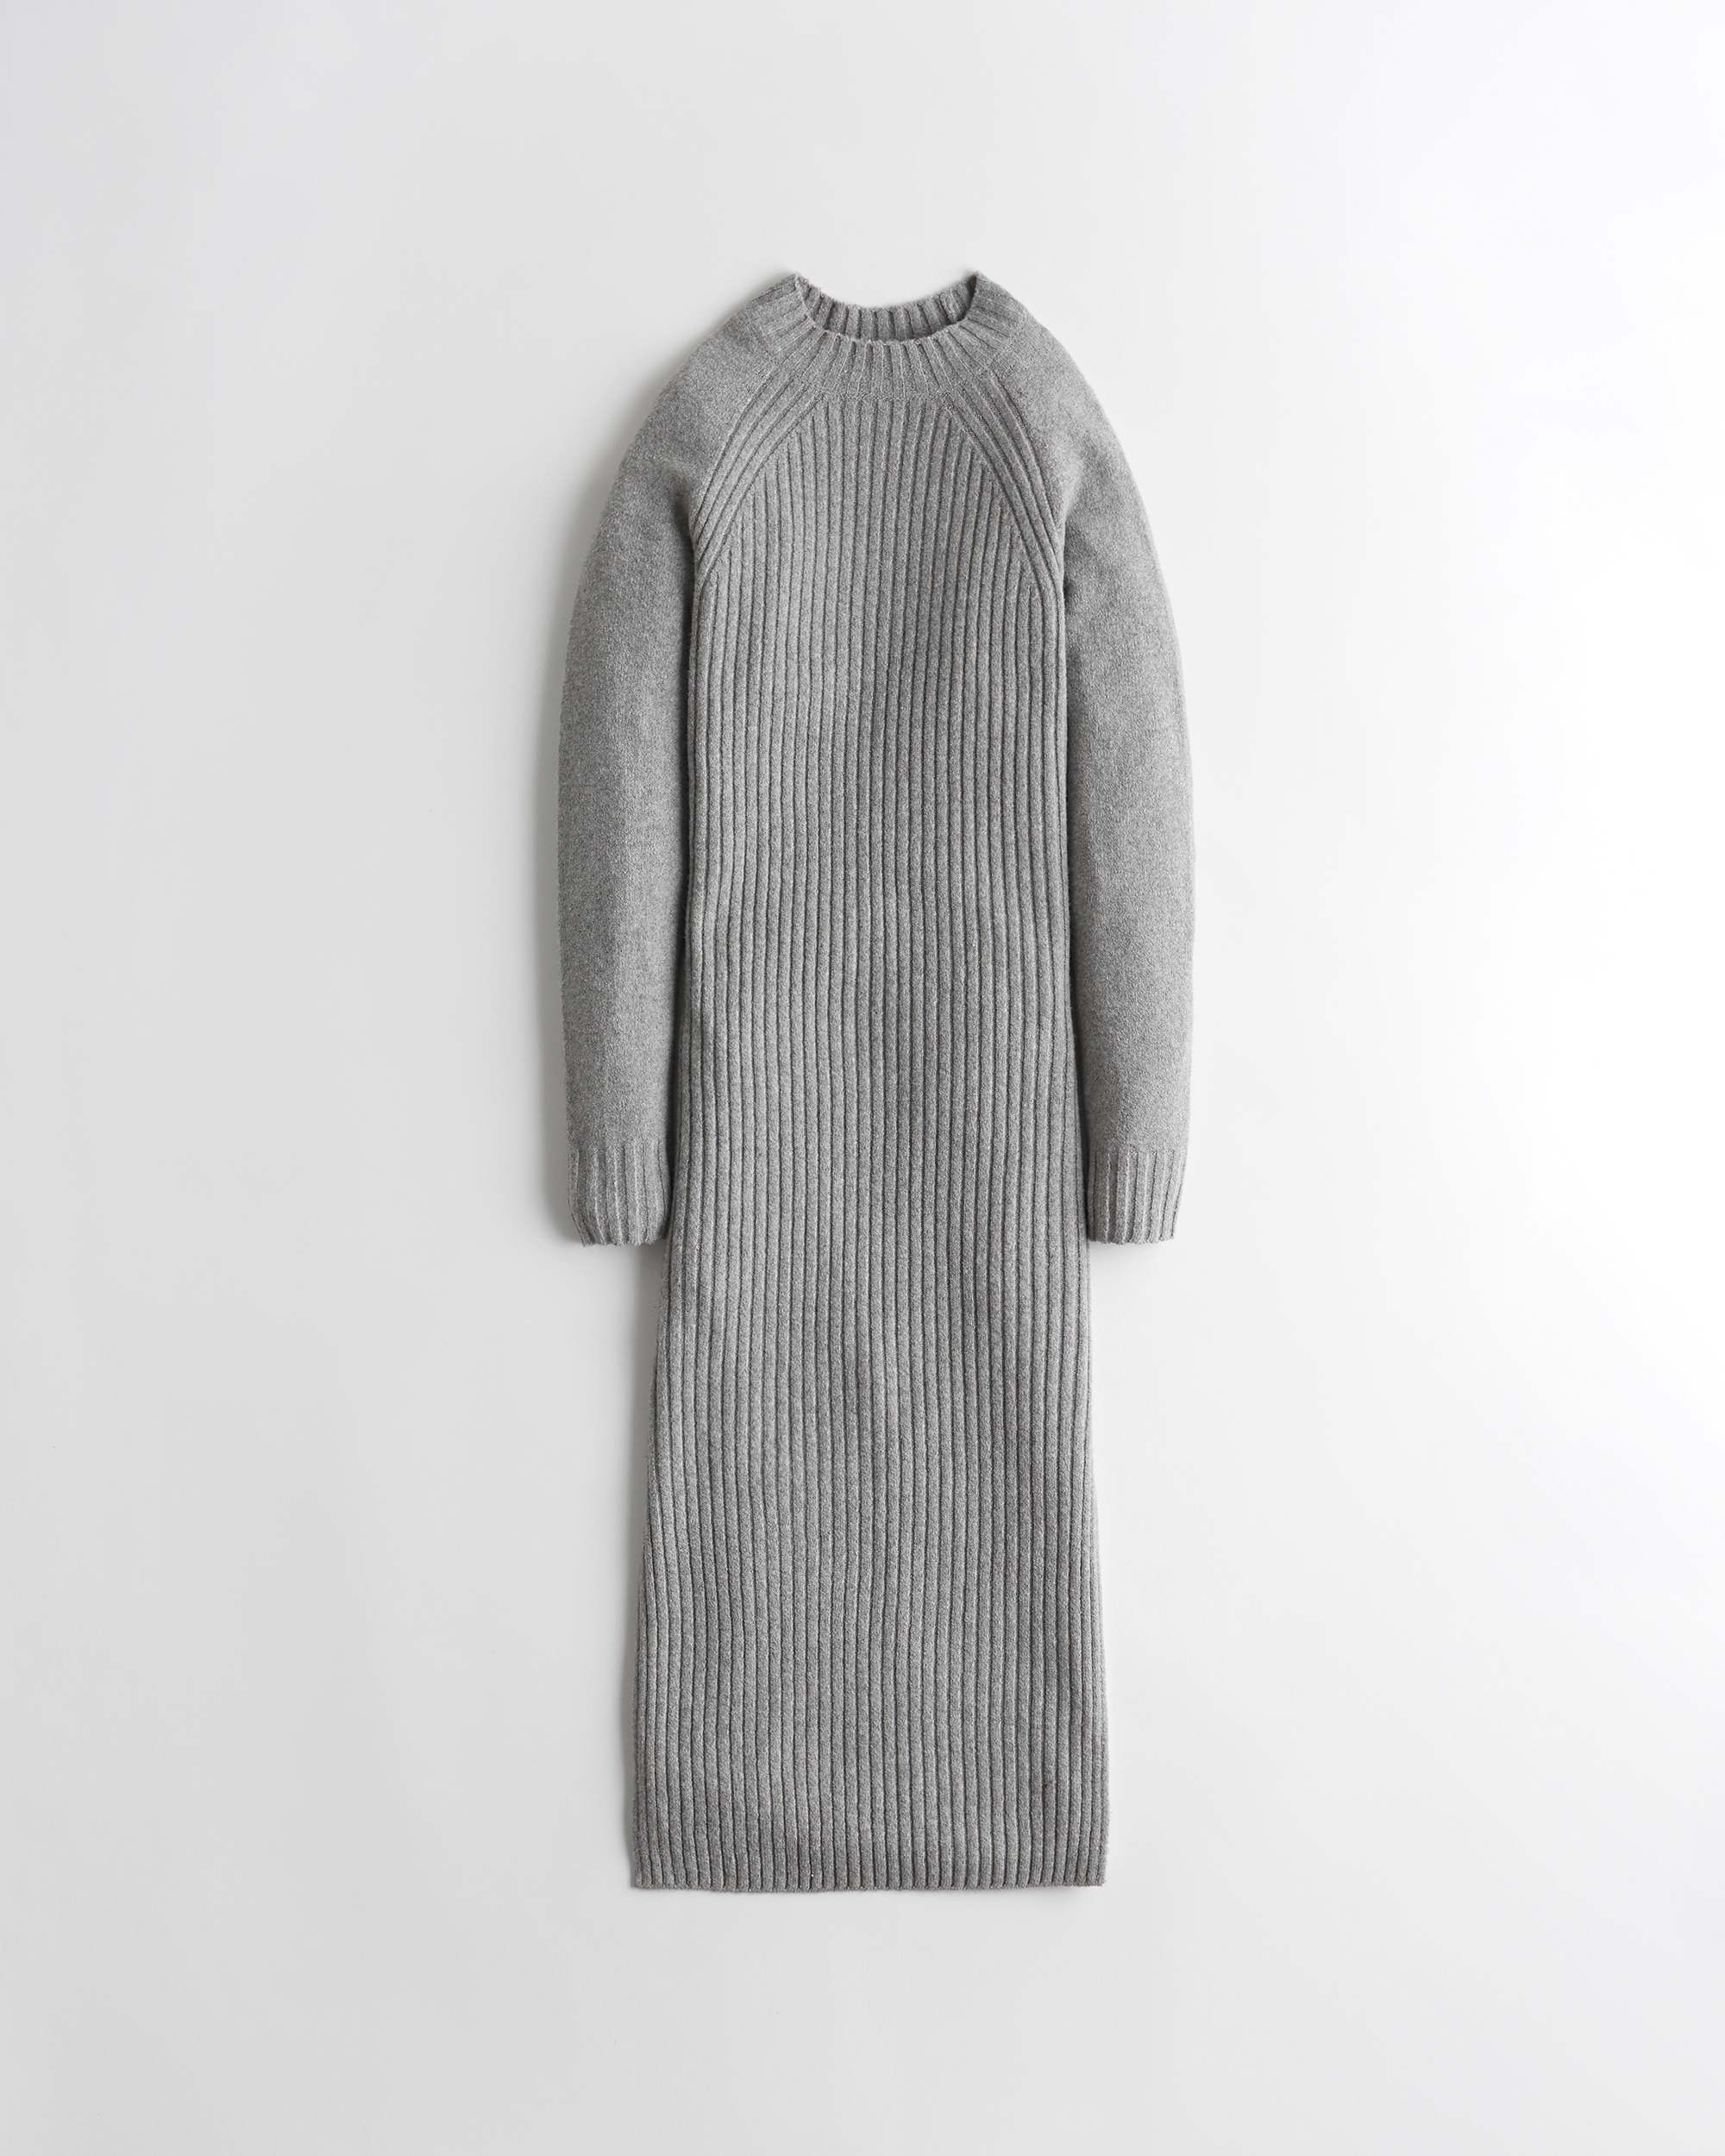 hollister ribbed sweater dress